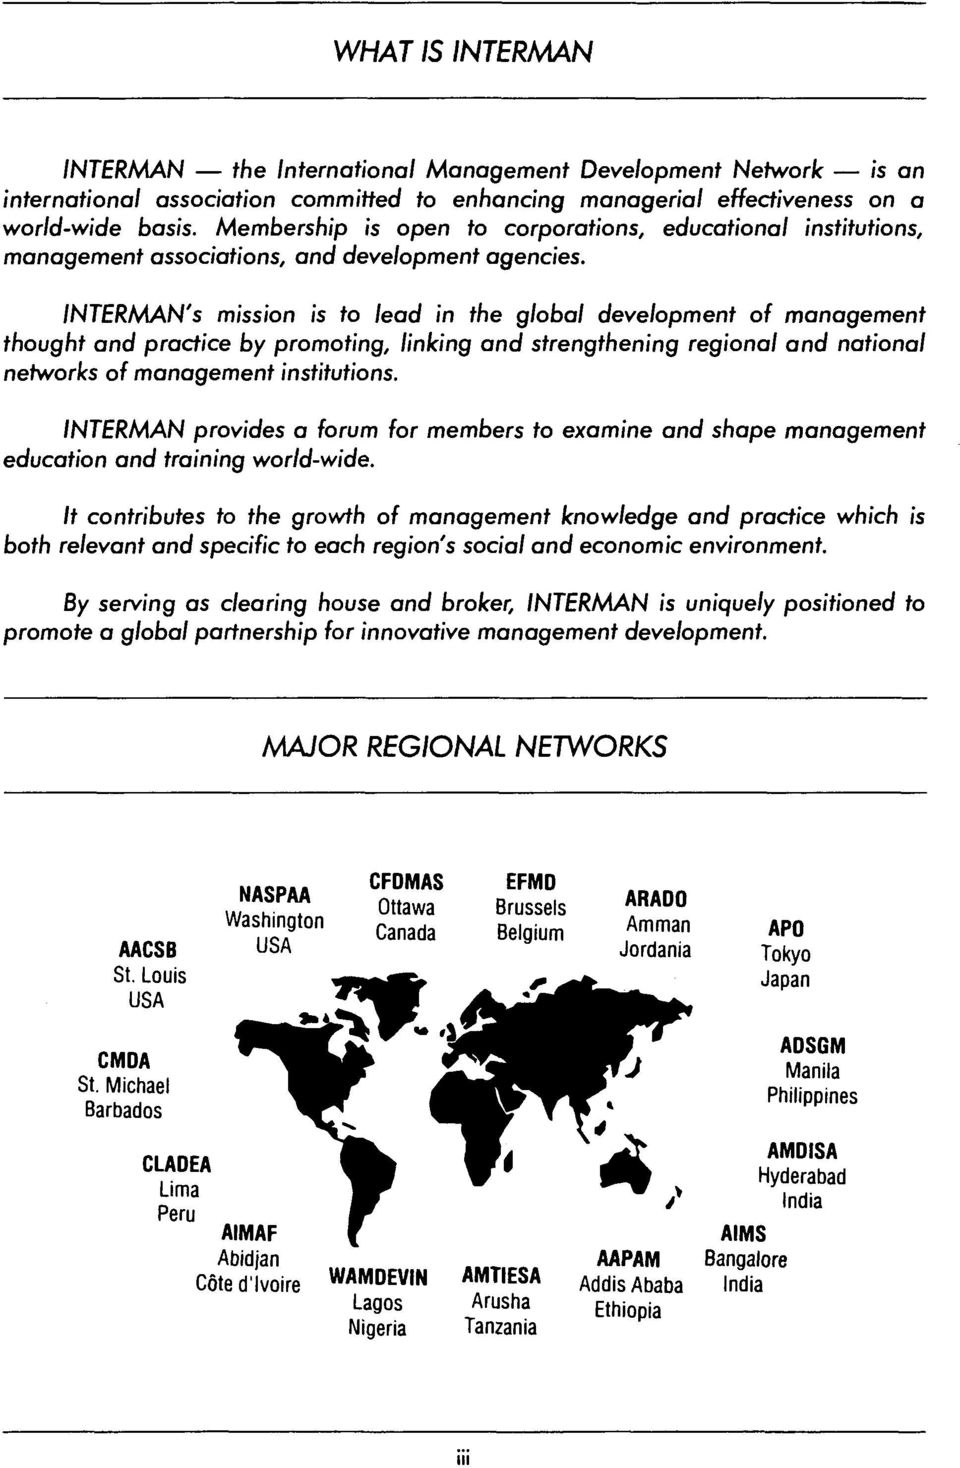 INTERMAN's mission is to lead in the global development of management thought and pratie by promoting, linking and strengthening regional and national networks of management institutions.